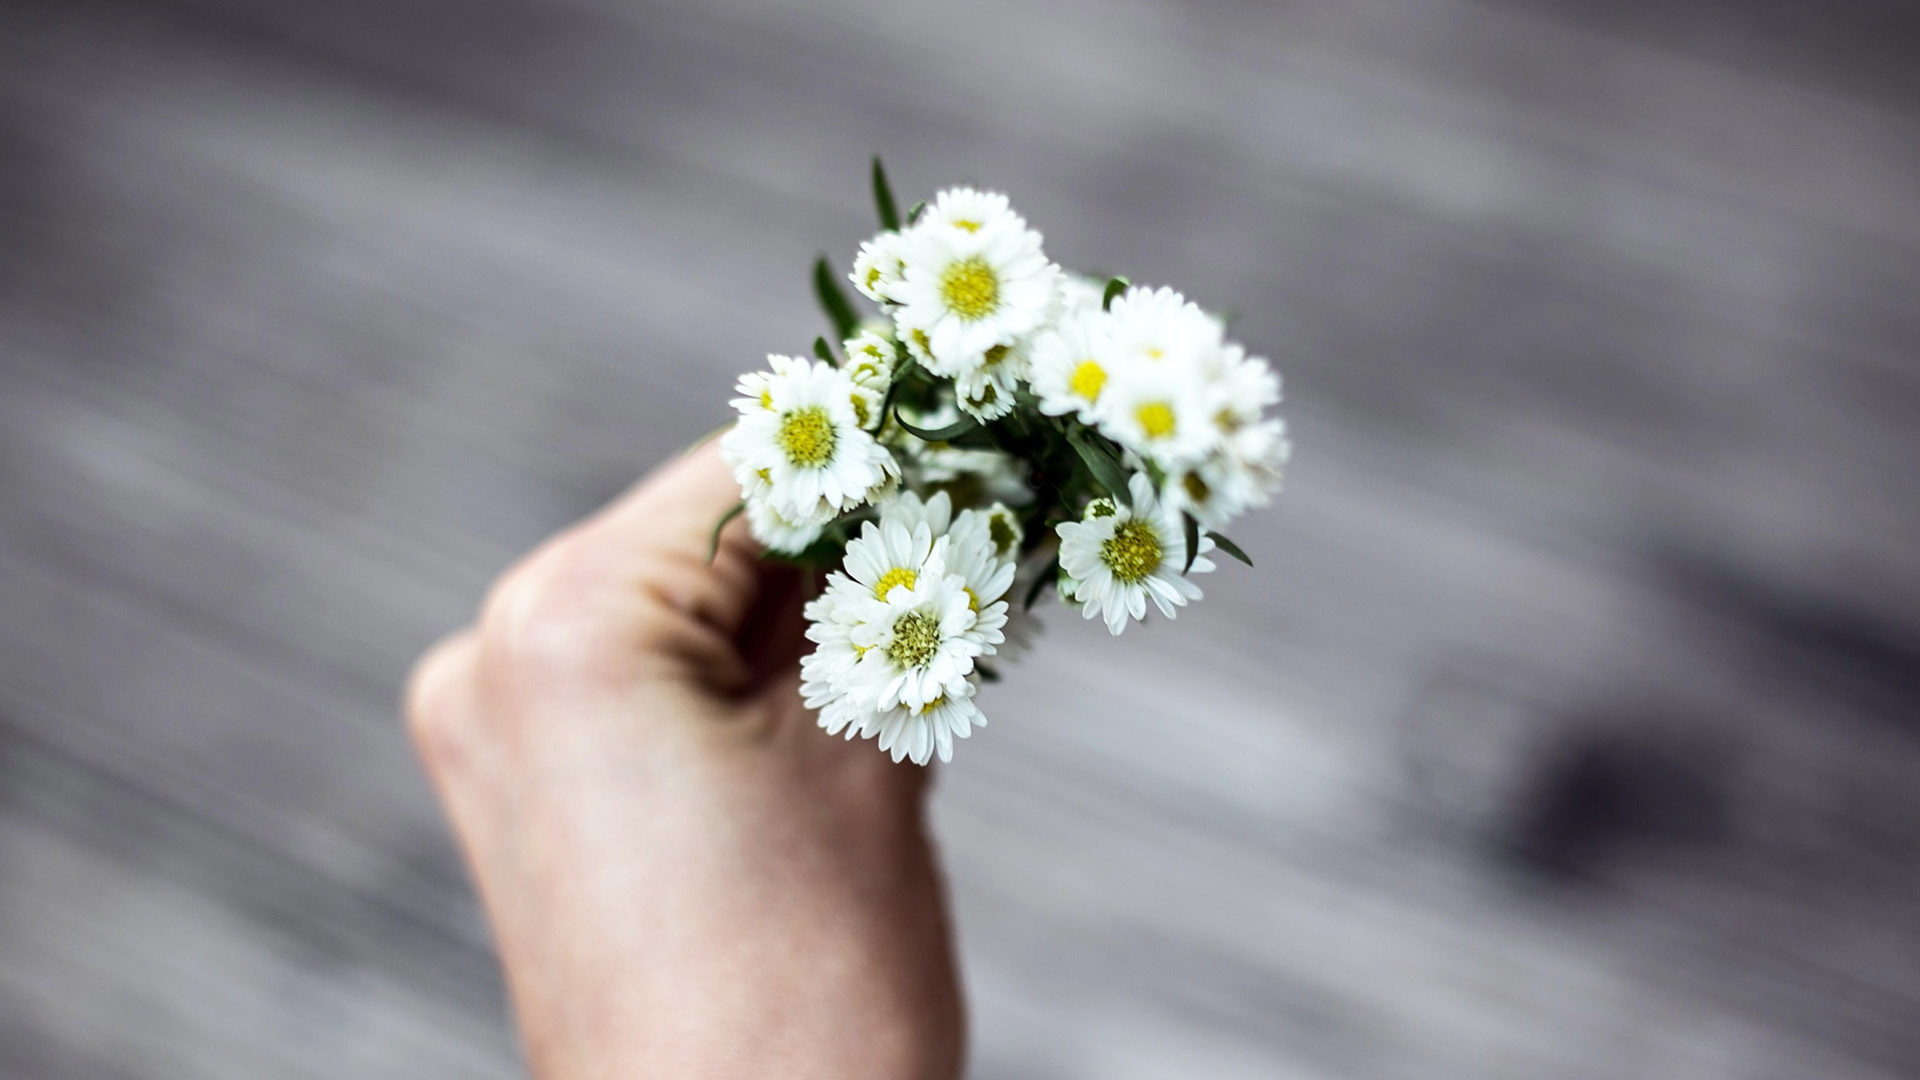 a hand holding a small bouquet of white flowers